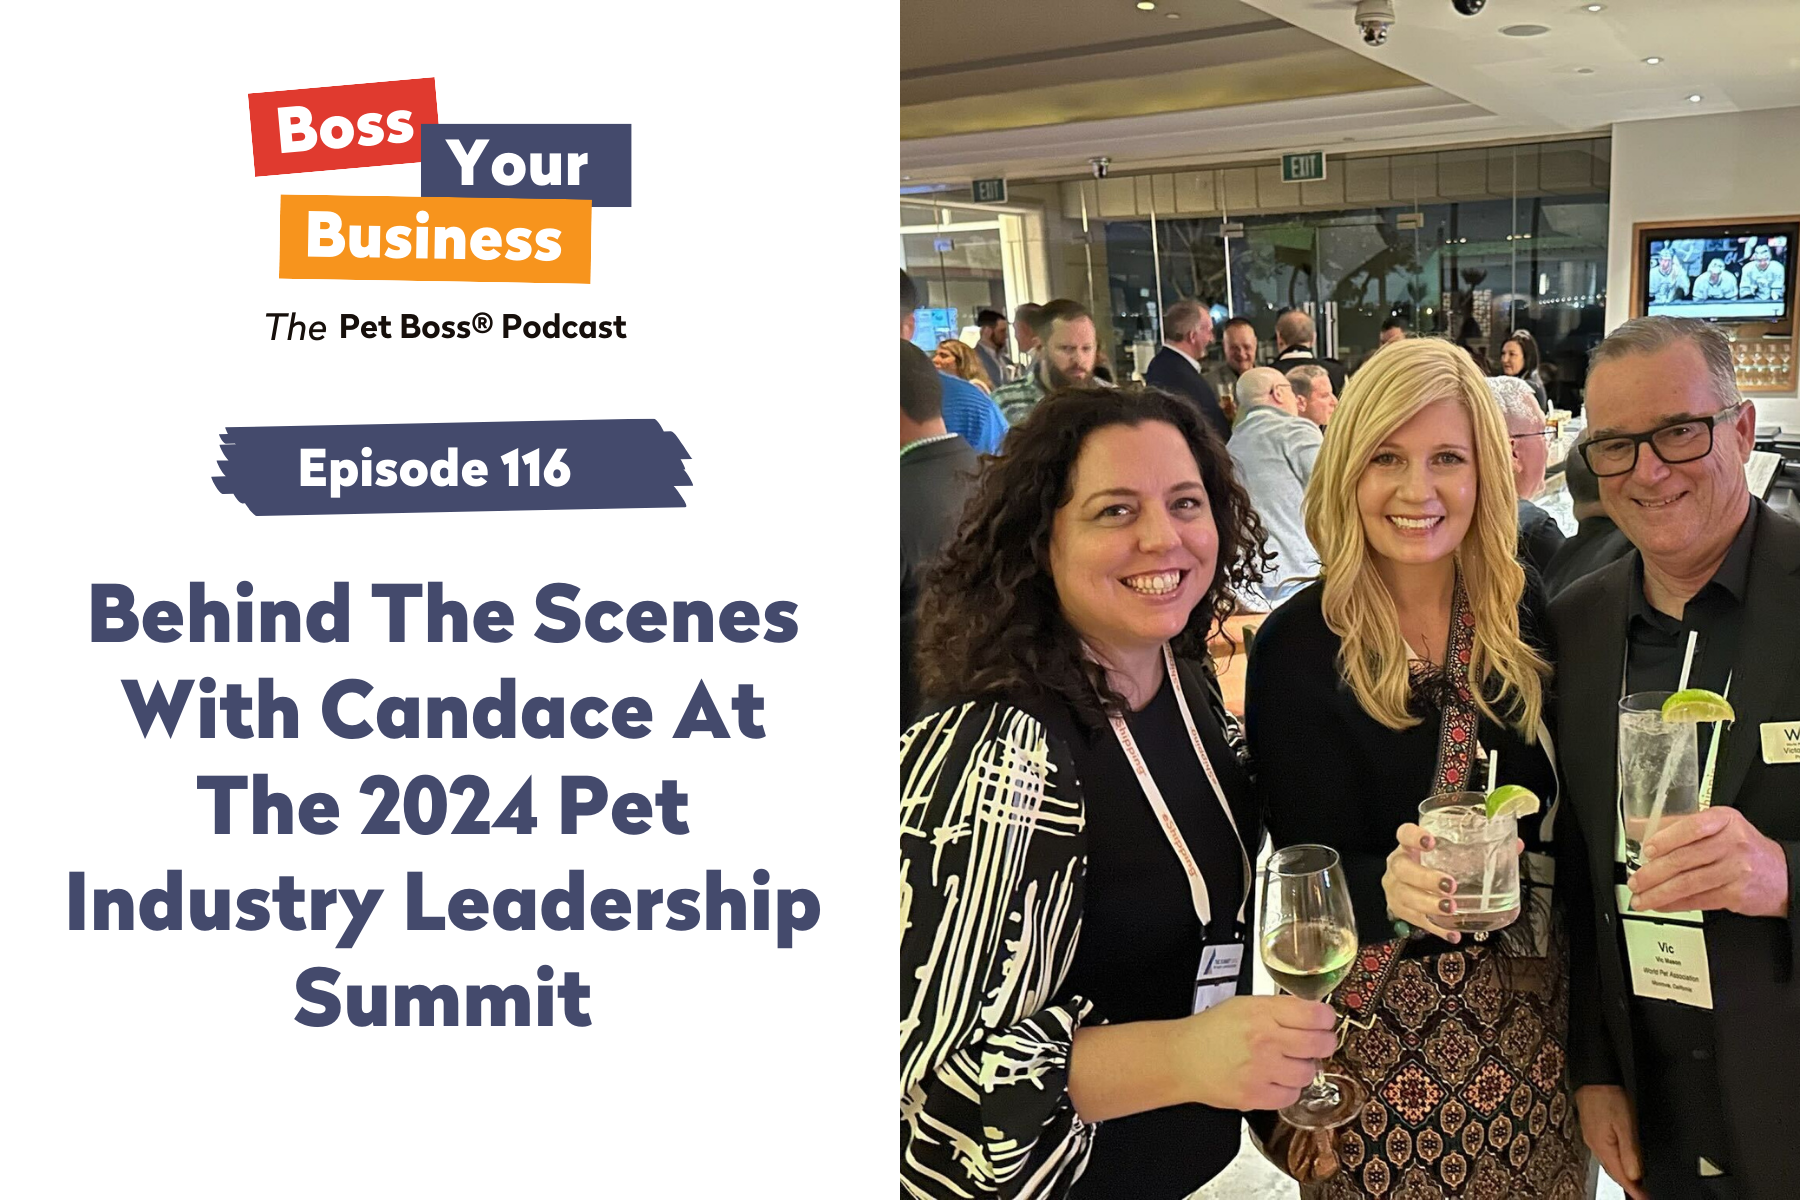 Episode 116 | Behind The Scenes With Candace At The 2024 Pet Industry Leadership Summit